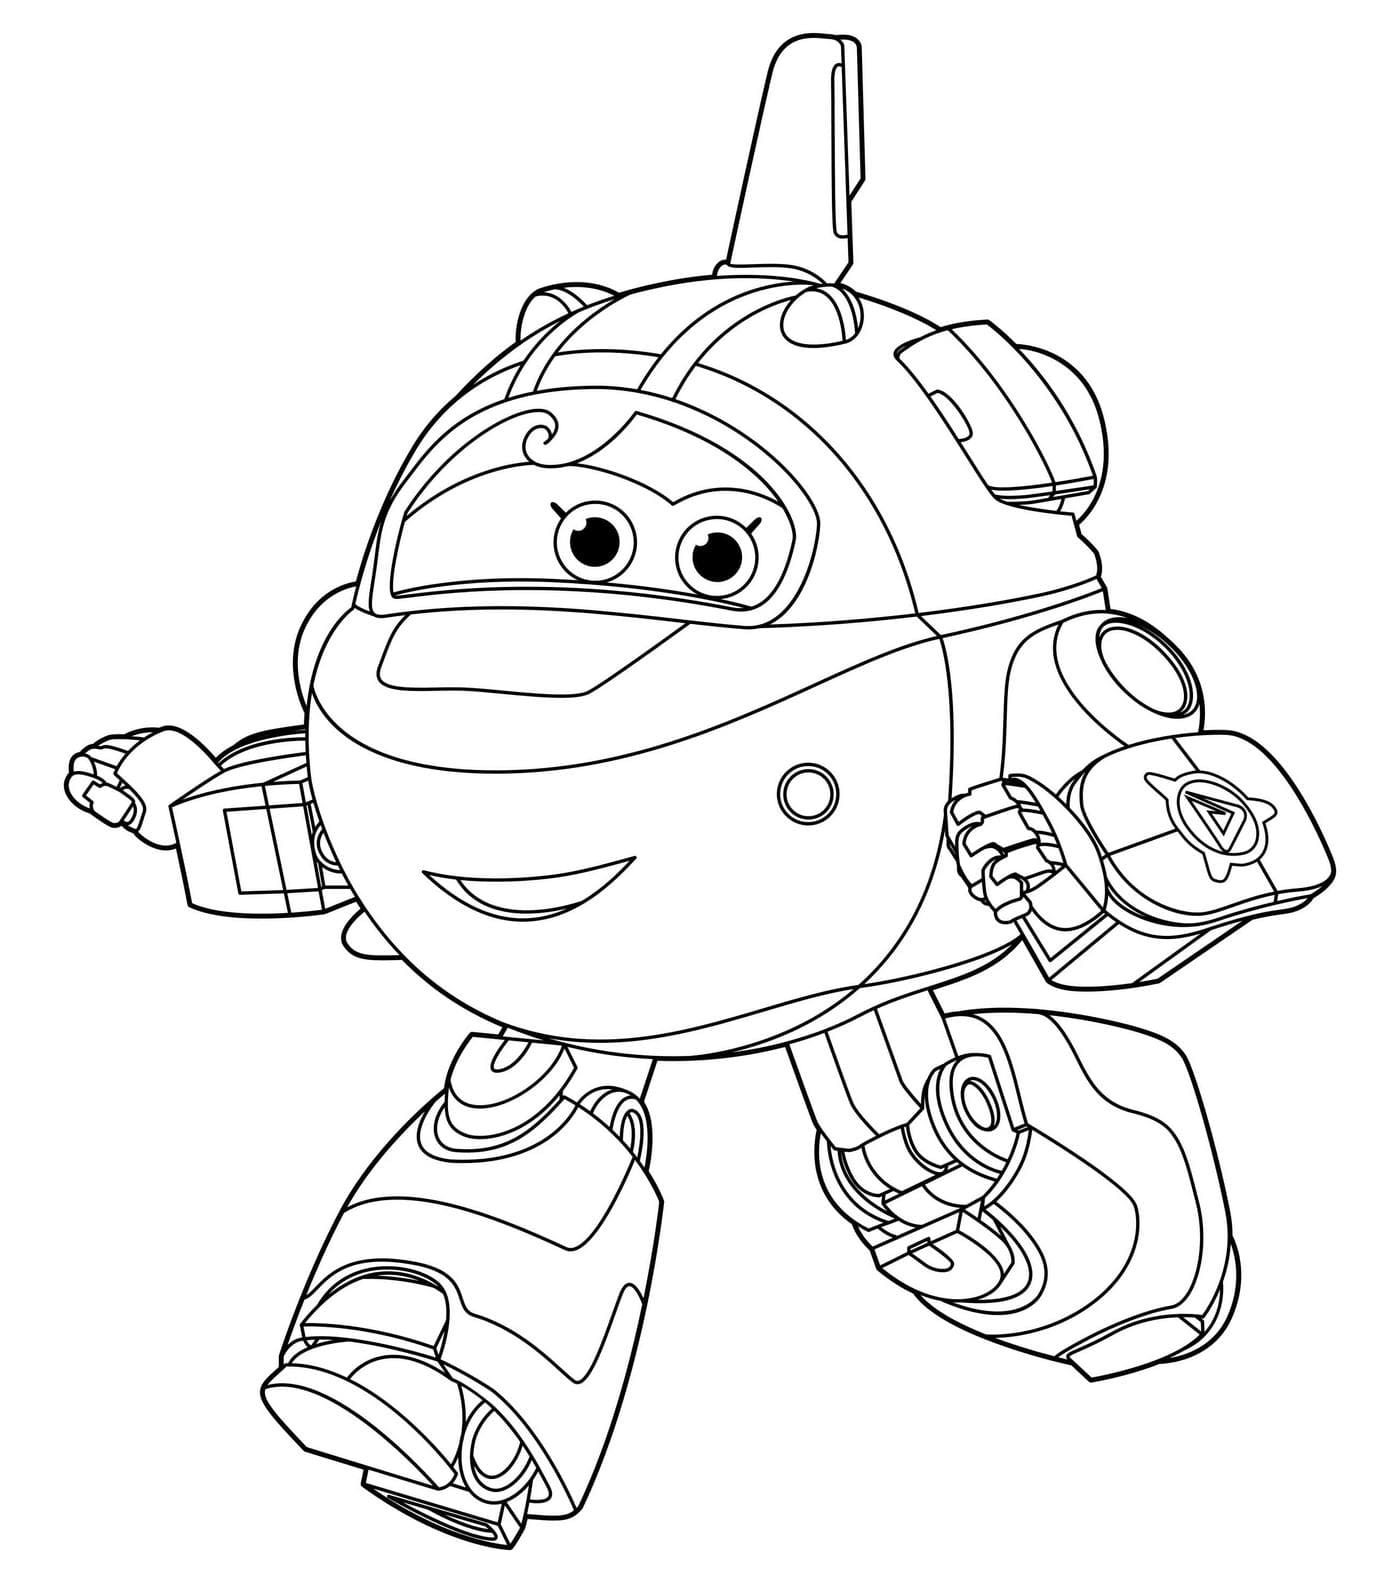 Super Wings Coloring Pages. Print for Kids | WONDER DAY